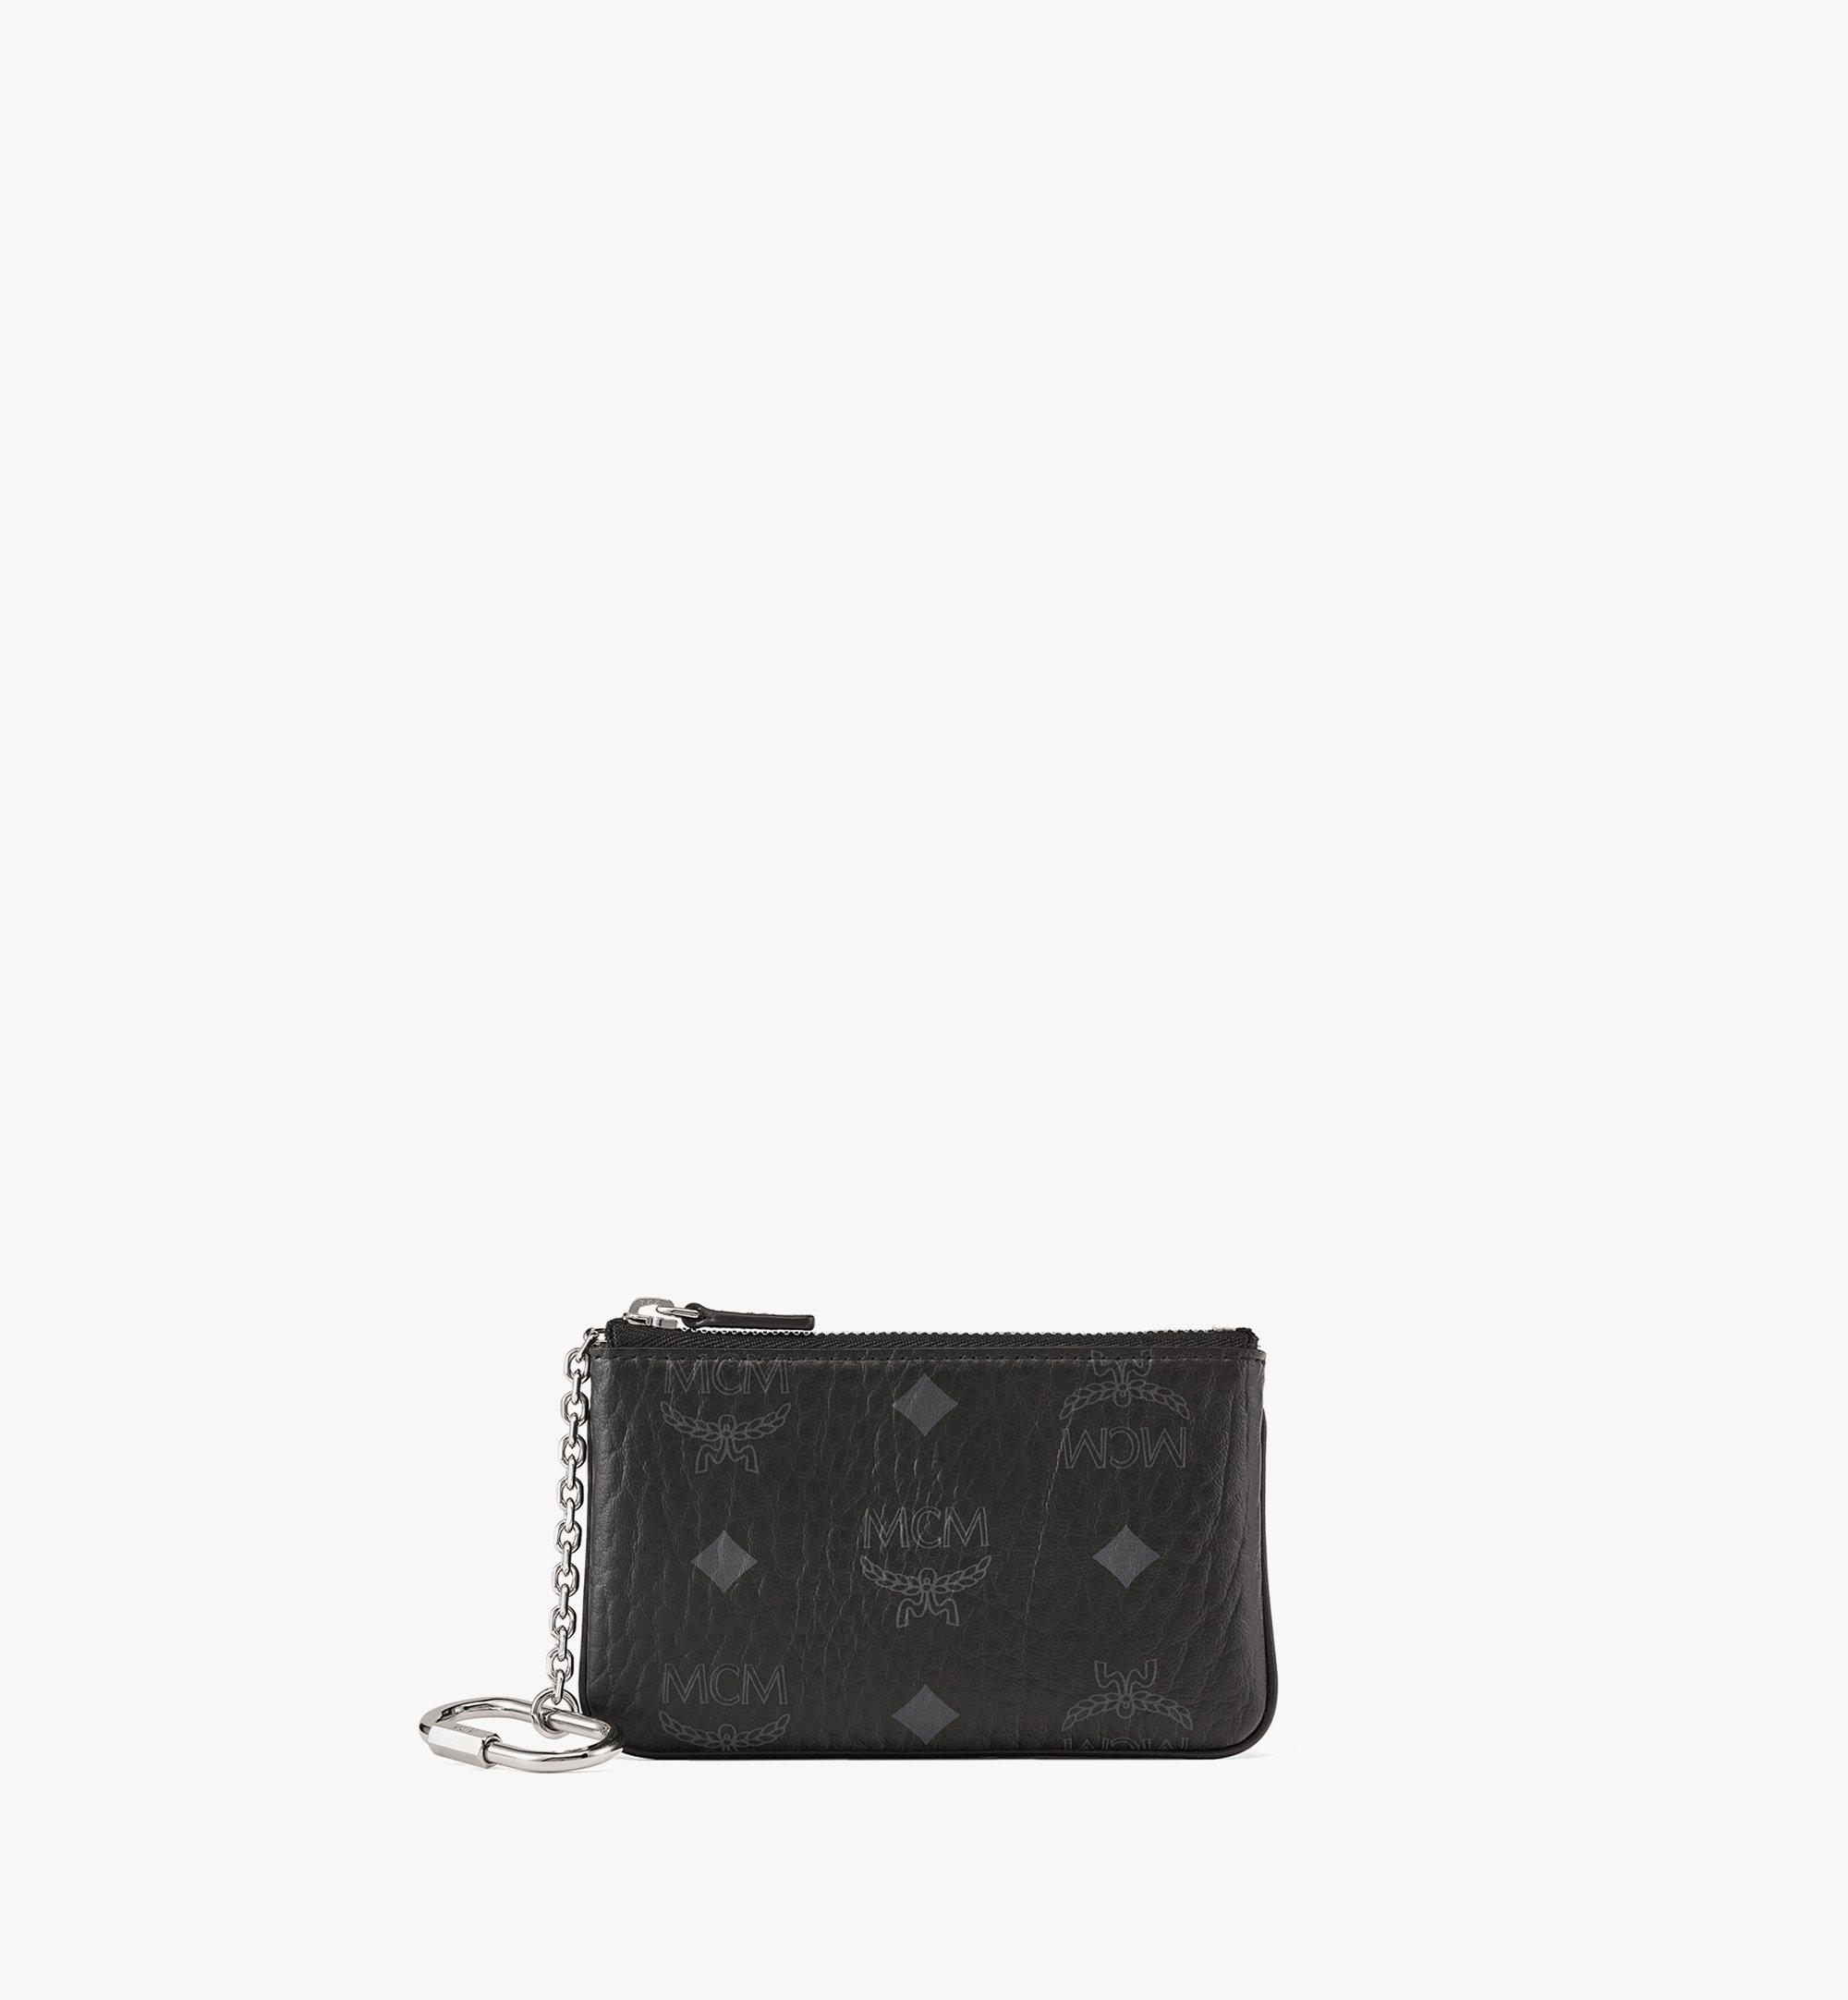 Mcm Women's Large Aren Embossed Patent Leather Wallet - Black